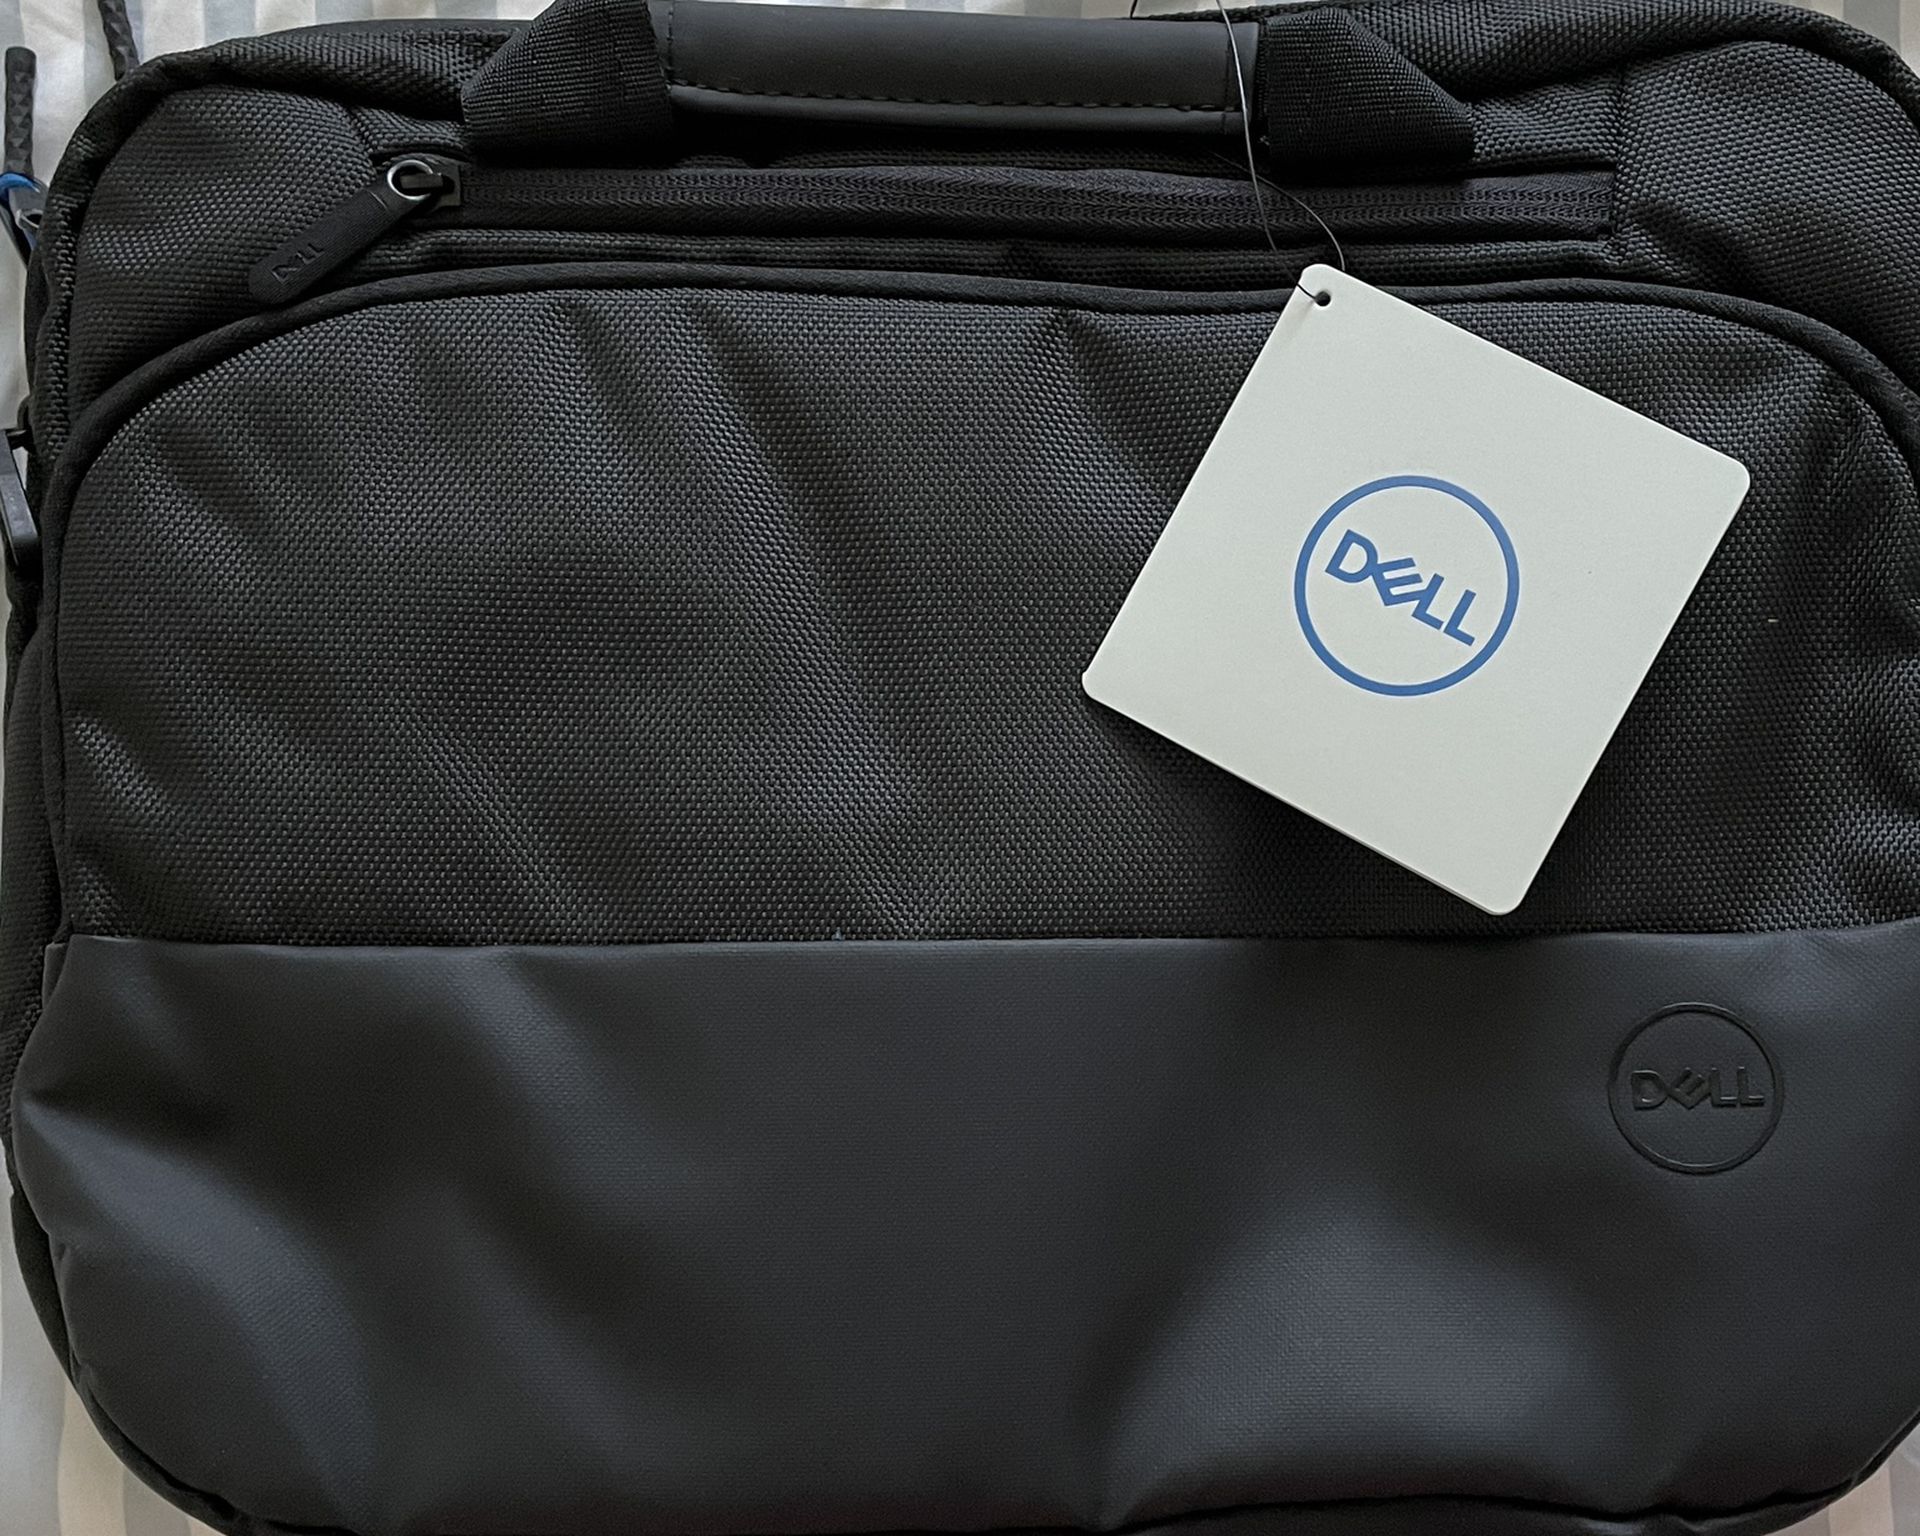 Dell 14” Laptop Bag New With Tags